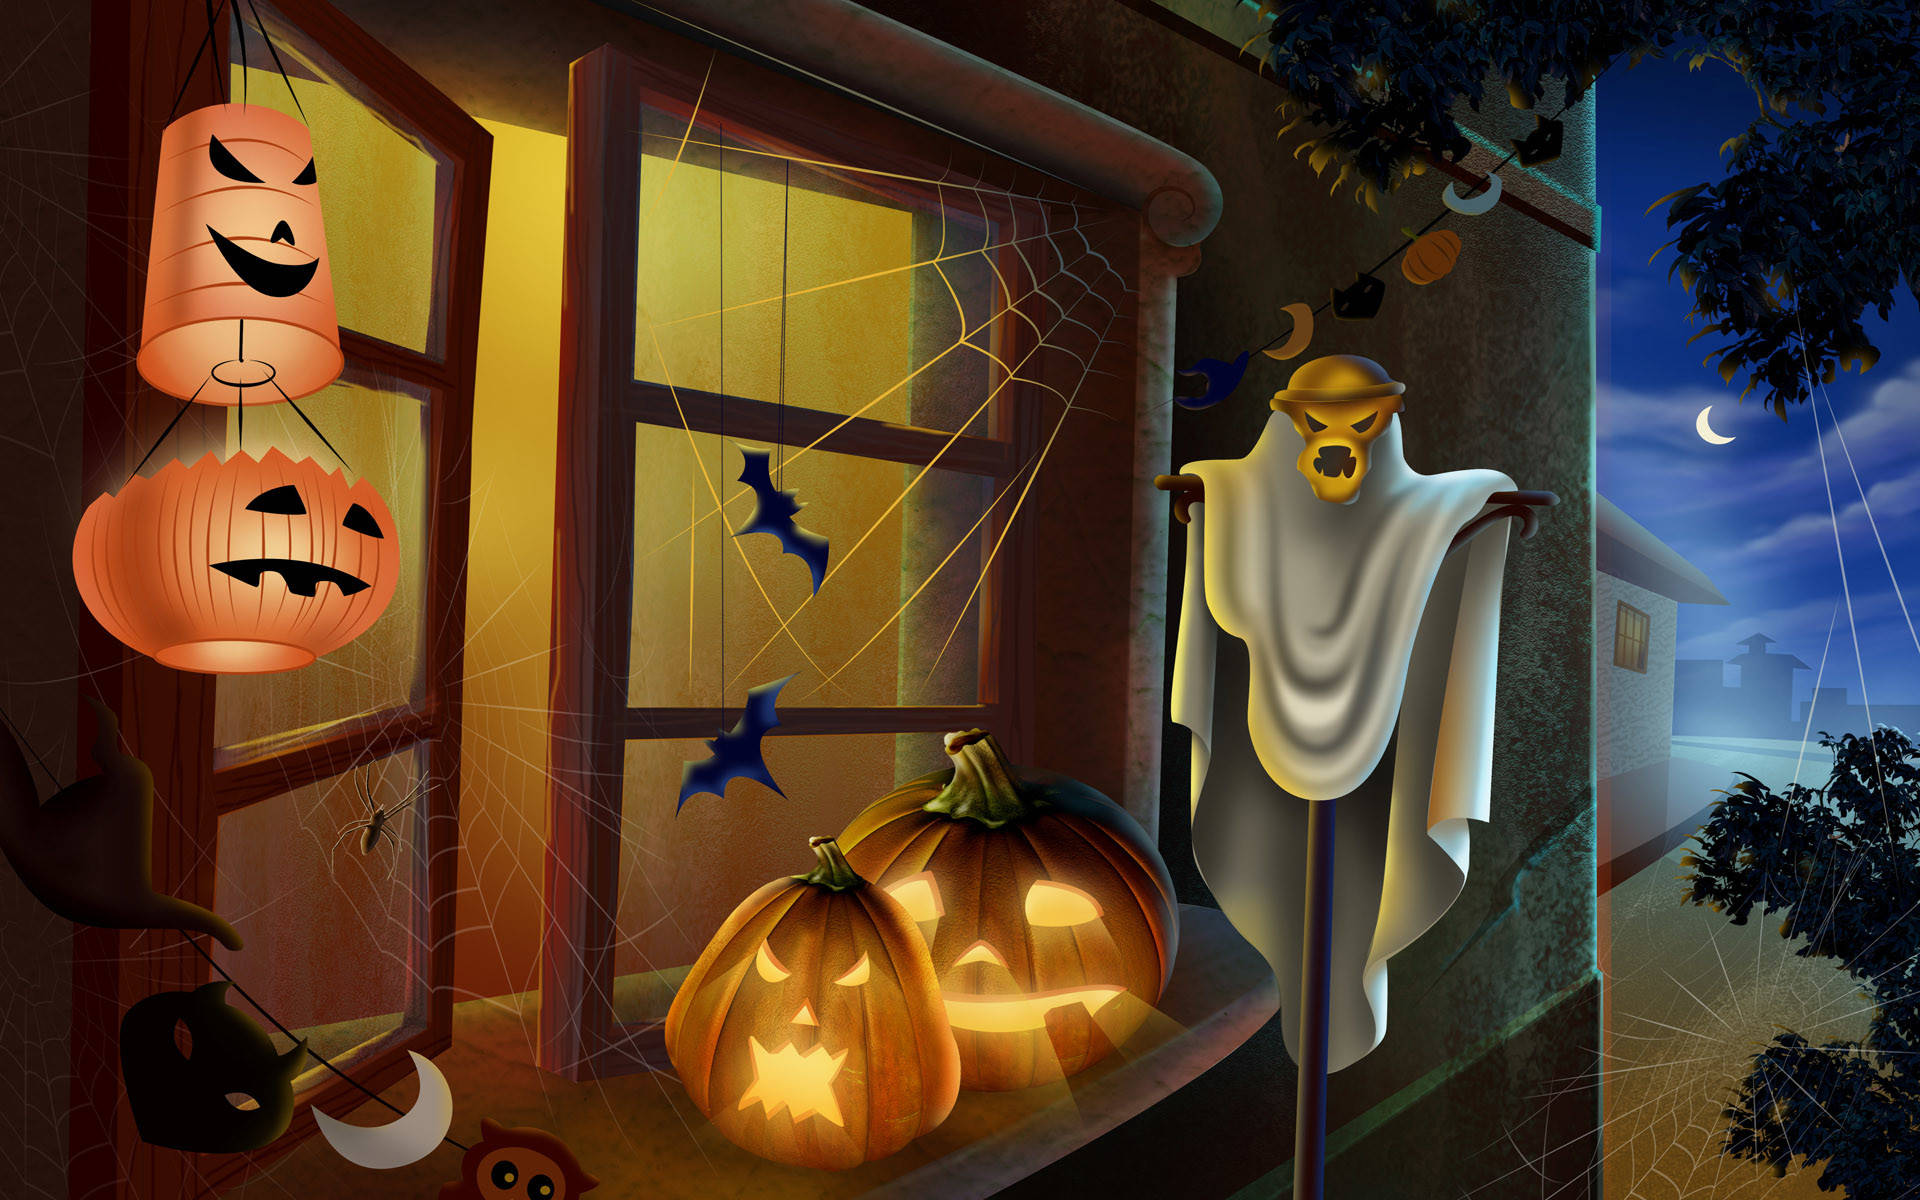 Grab A Spooky Halloween Desktop Theme For Your Computer – Brand … Grab A Spooky Halloween Desktop Theme For Your Computer Brand